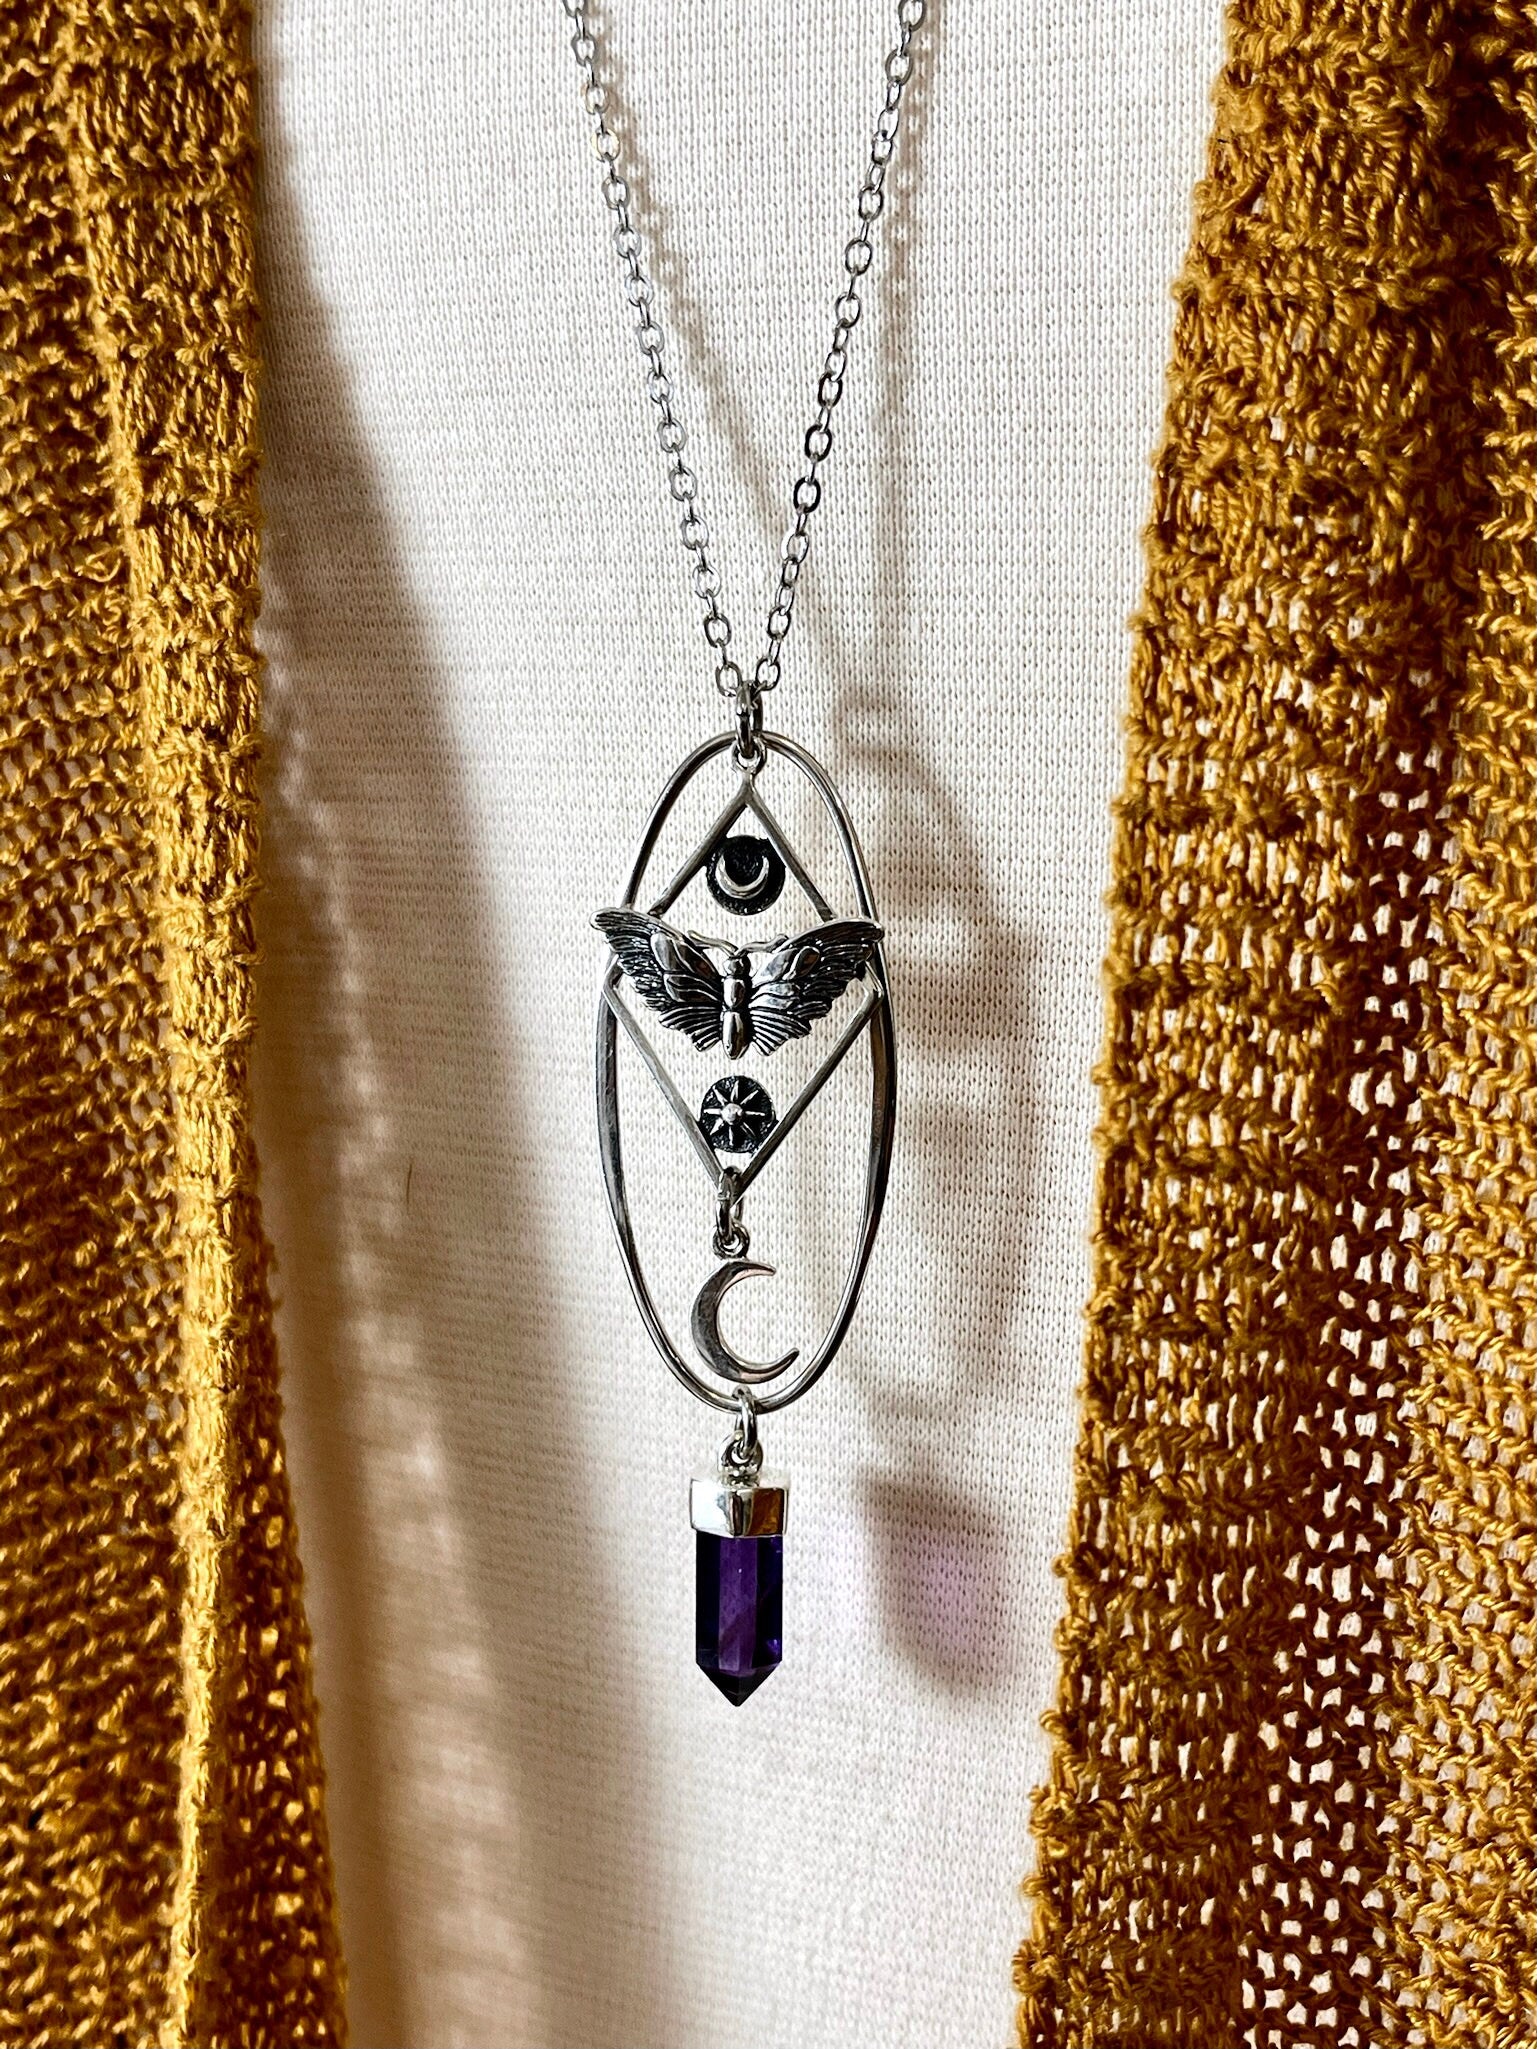 Amethyst Necklace, Bohemian Jewelry, Butterfly Necklace, Etsy ID: 1618683175, Gothic Jewelry, Jewelry, Layered Charm, Moth jewelry, Moth Necklace, Necklaces, Pendants, Sun and Moon, Talisman Necklace, TINY TALISMANS, Totem Amulet Jewelry, Witch Jewelry, W